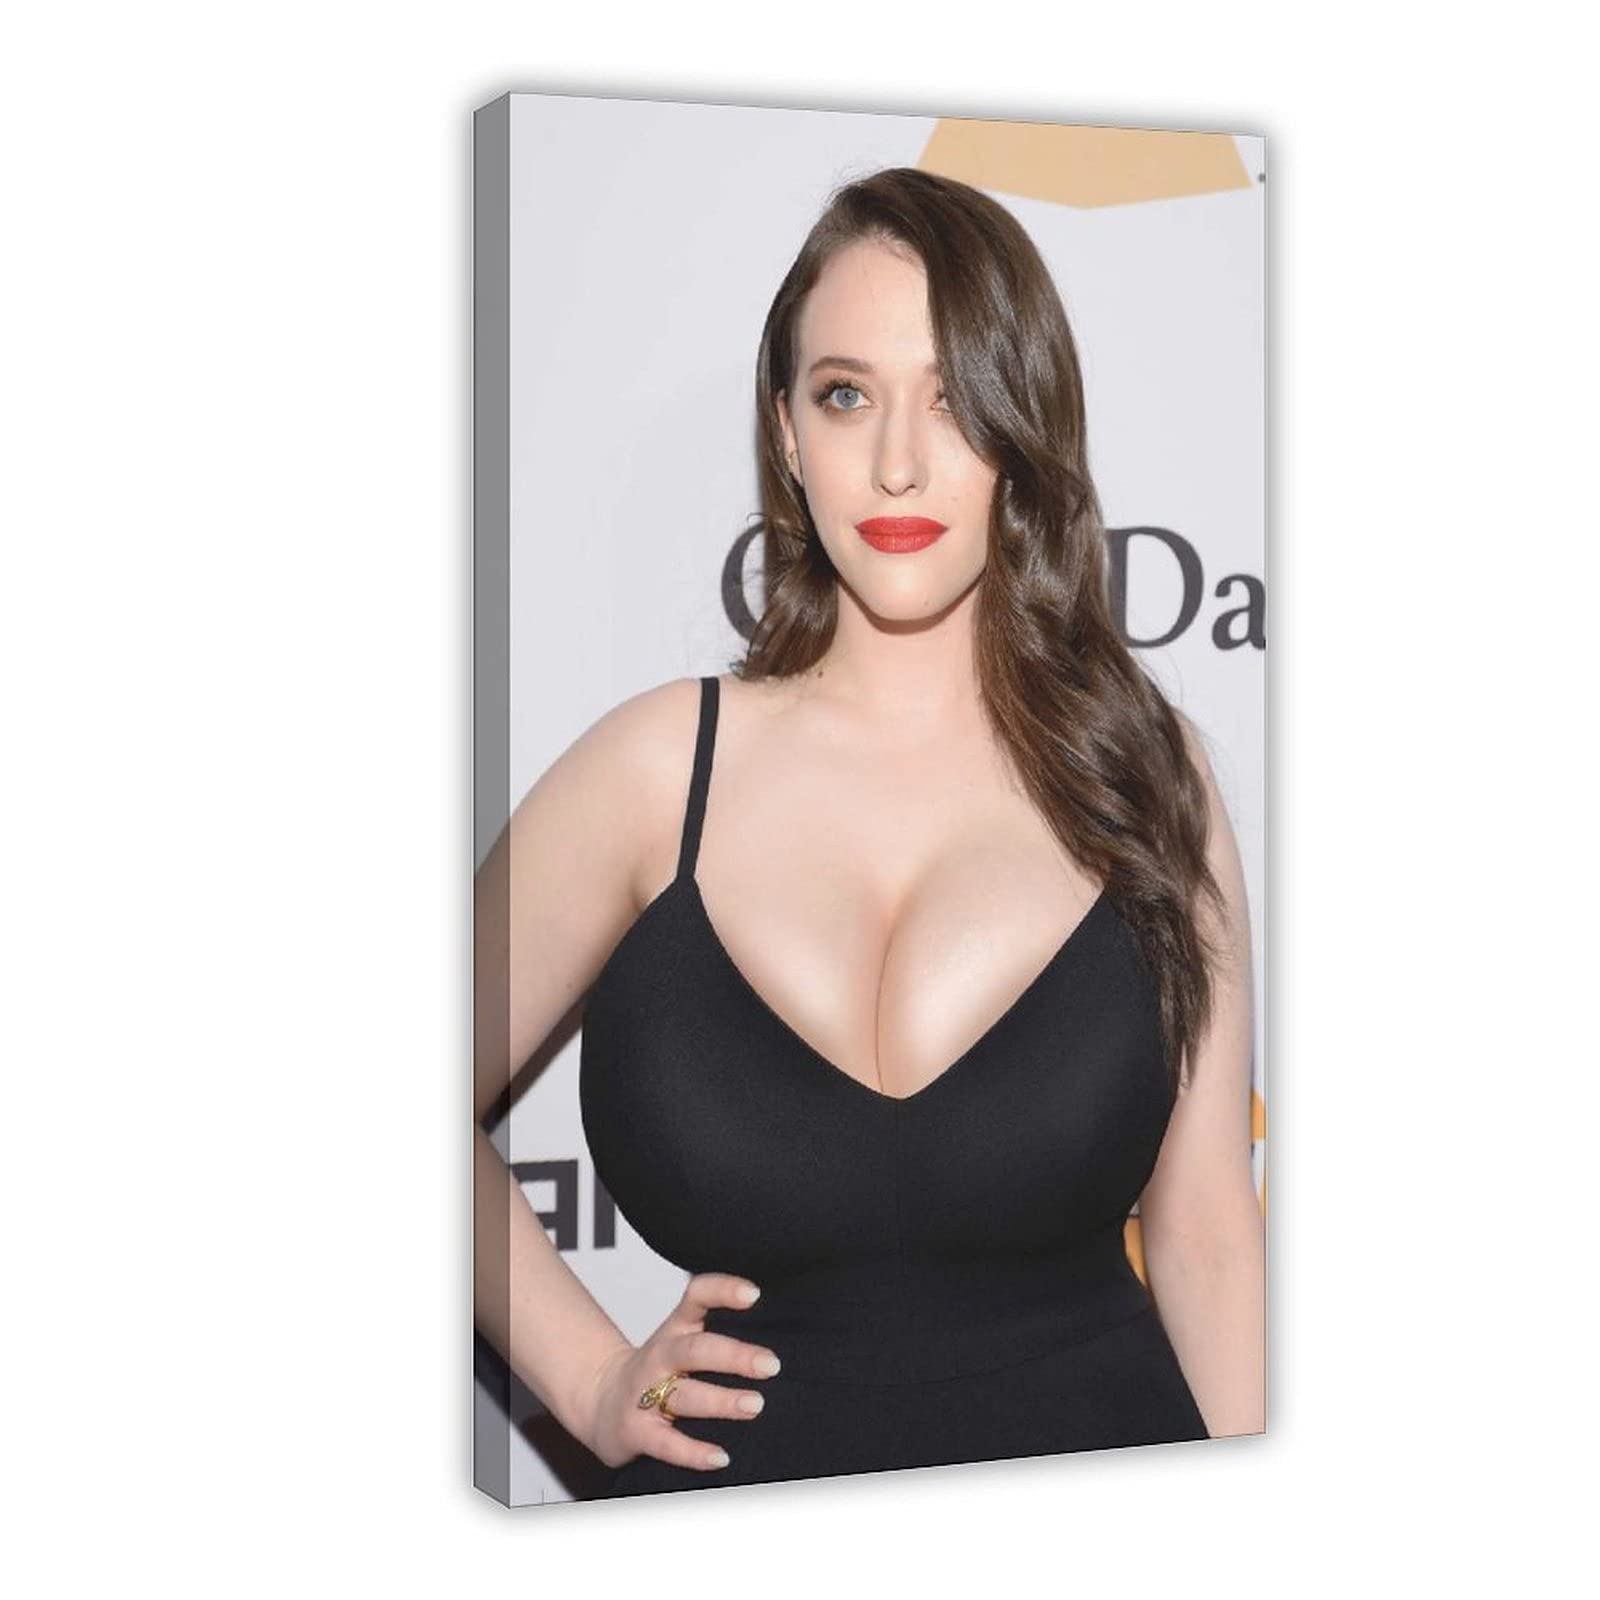 andy tee share how big are kat dennings tits photos